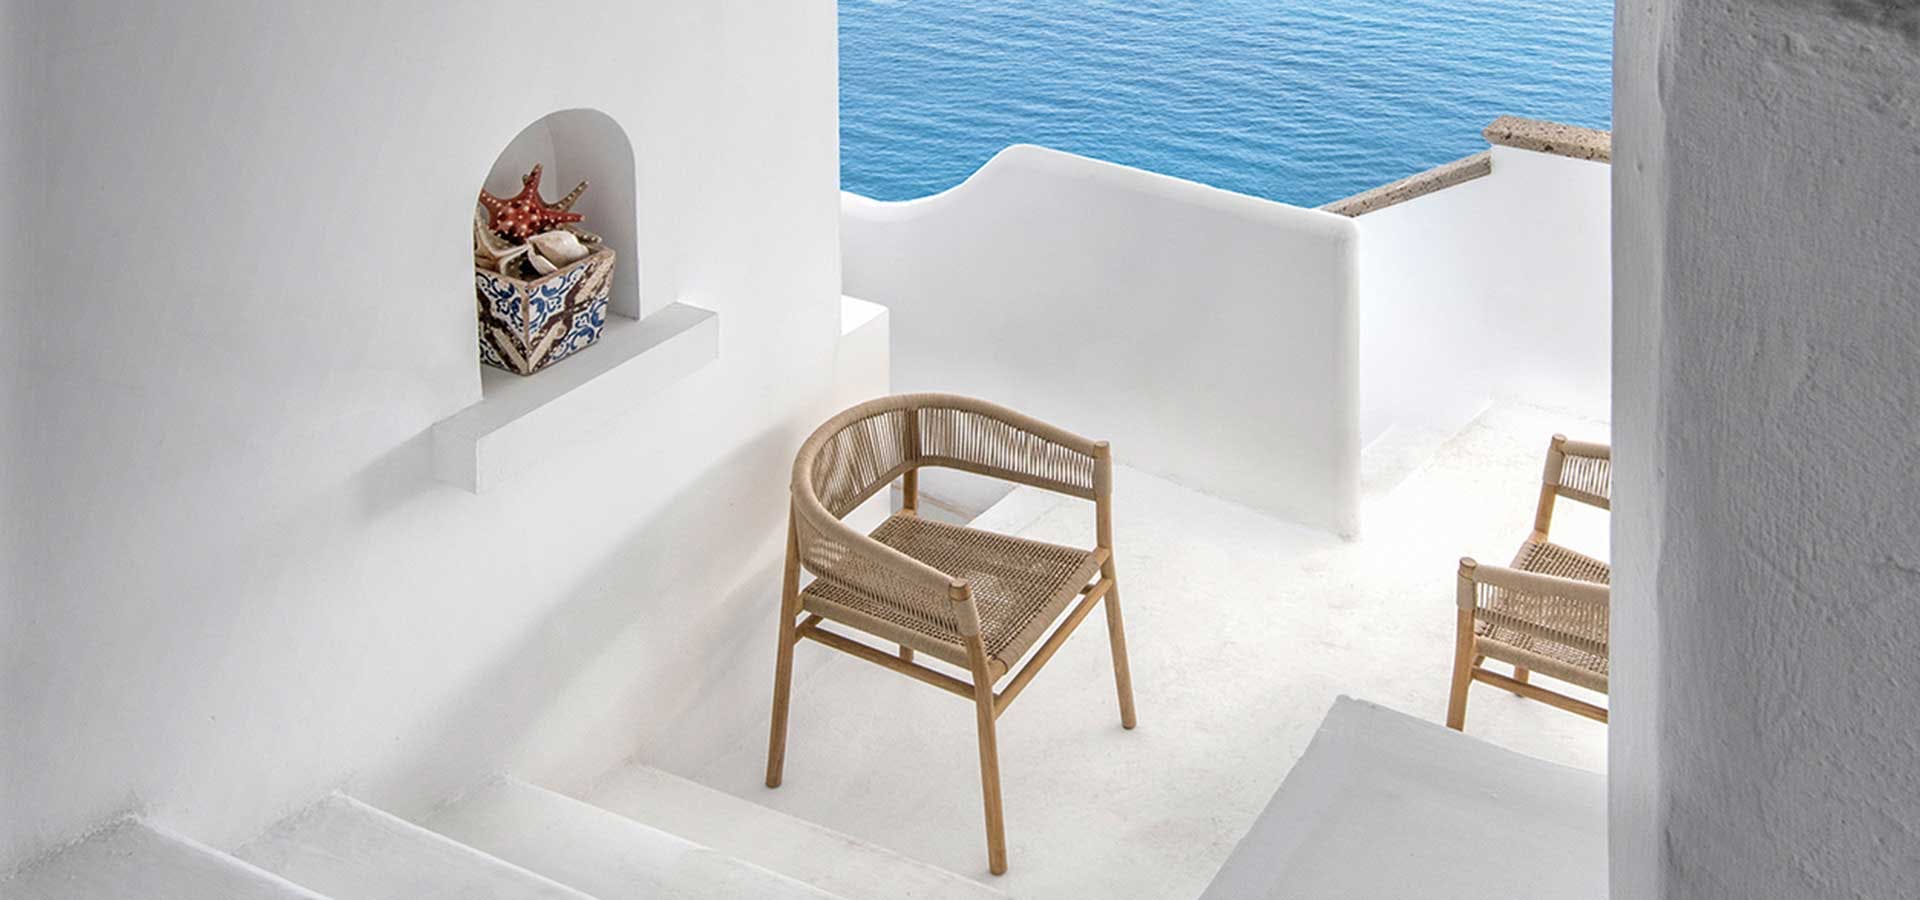 Image 36 of Kilt view1 1 in Outdoors spaces that break design boundaries with indoors - Cosentino